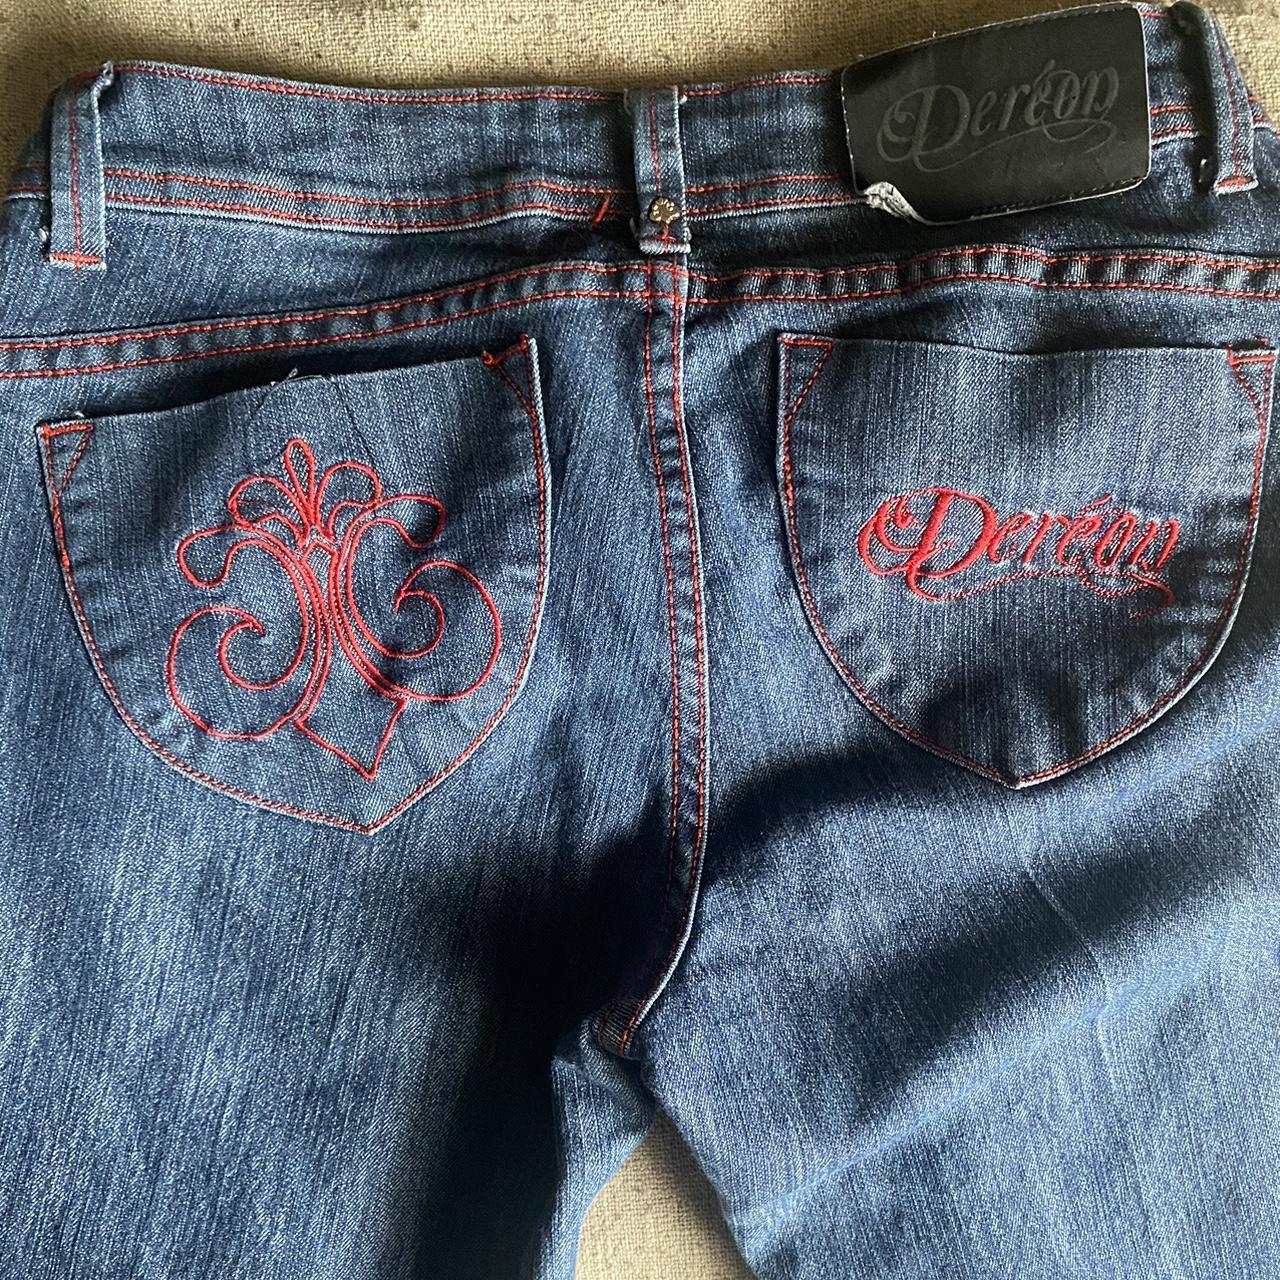 Women's Navy and Red Jeans | Depop